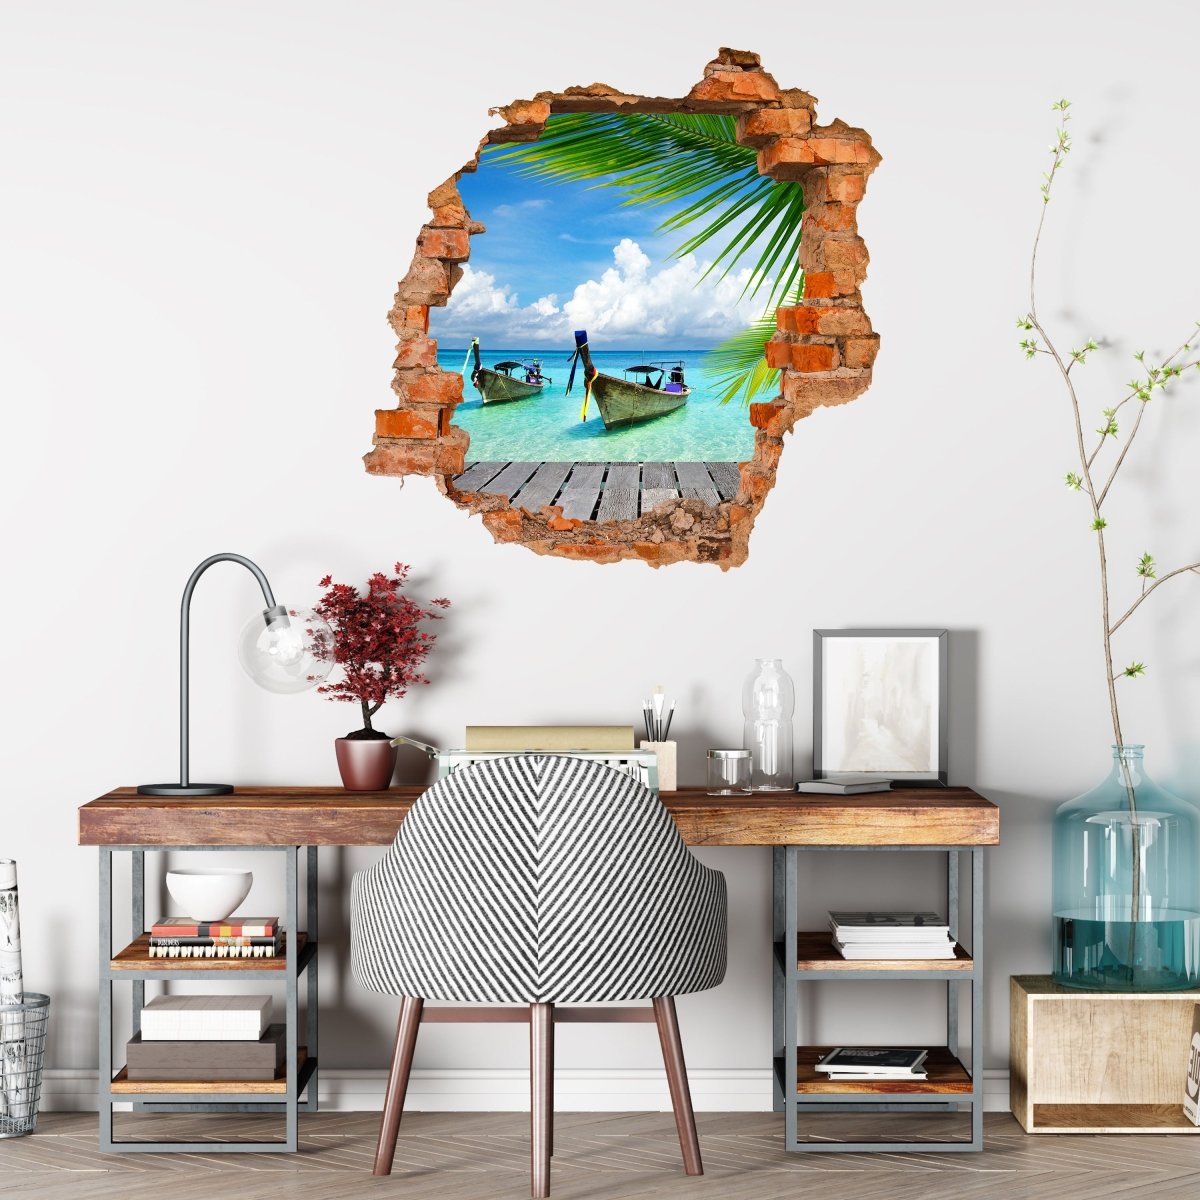 3D wall sticker paradise - wall decal M0495